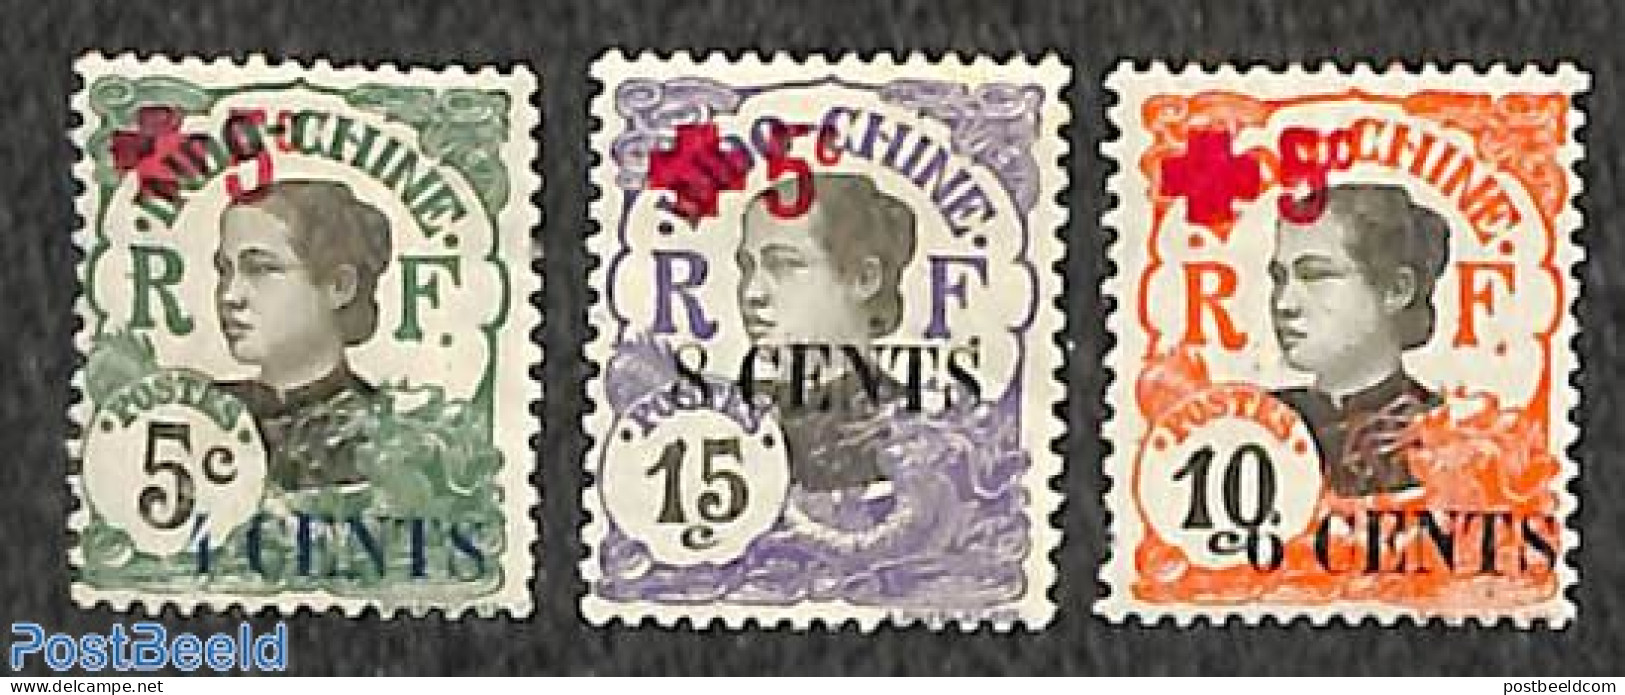 French Indochina 1918 Overprints 3v, Unused (hinged), Health - Red Cross - Red Cross